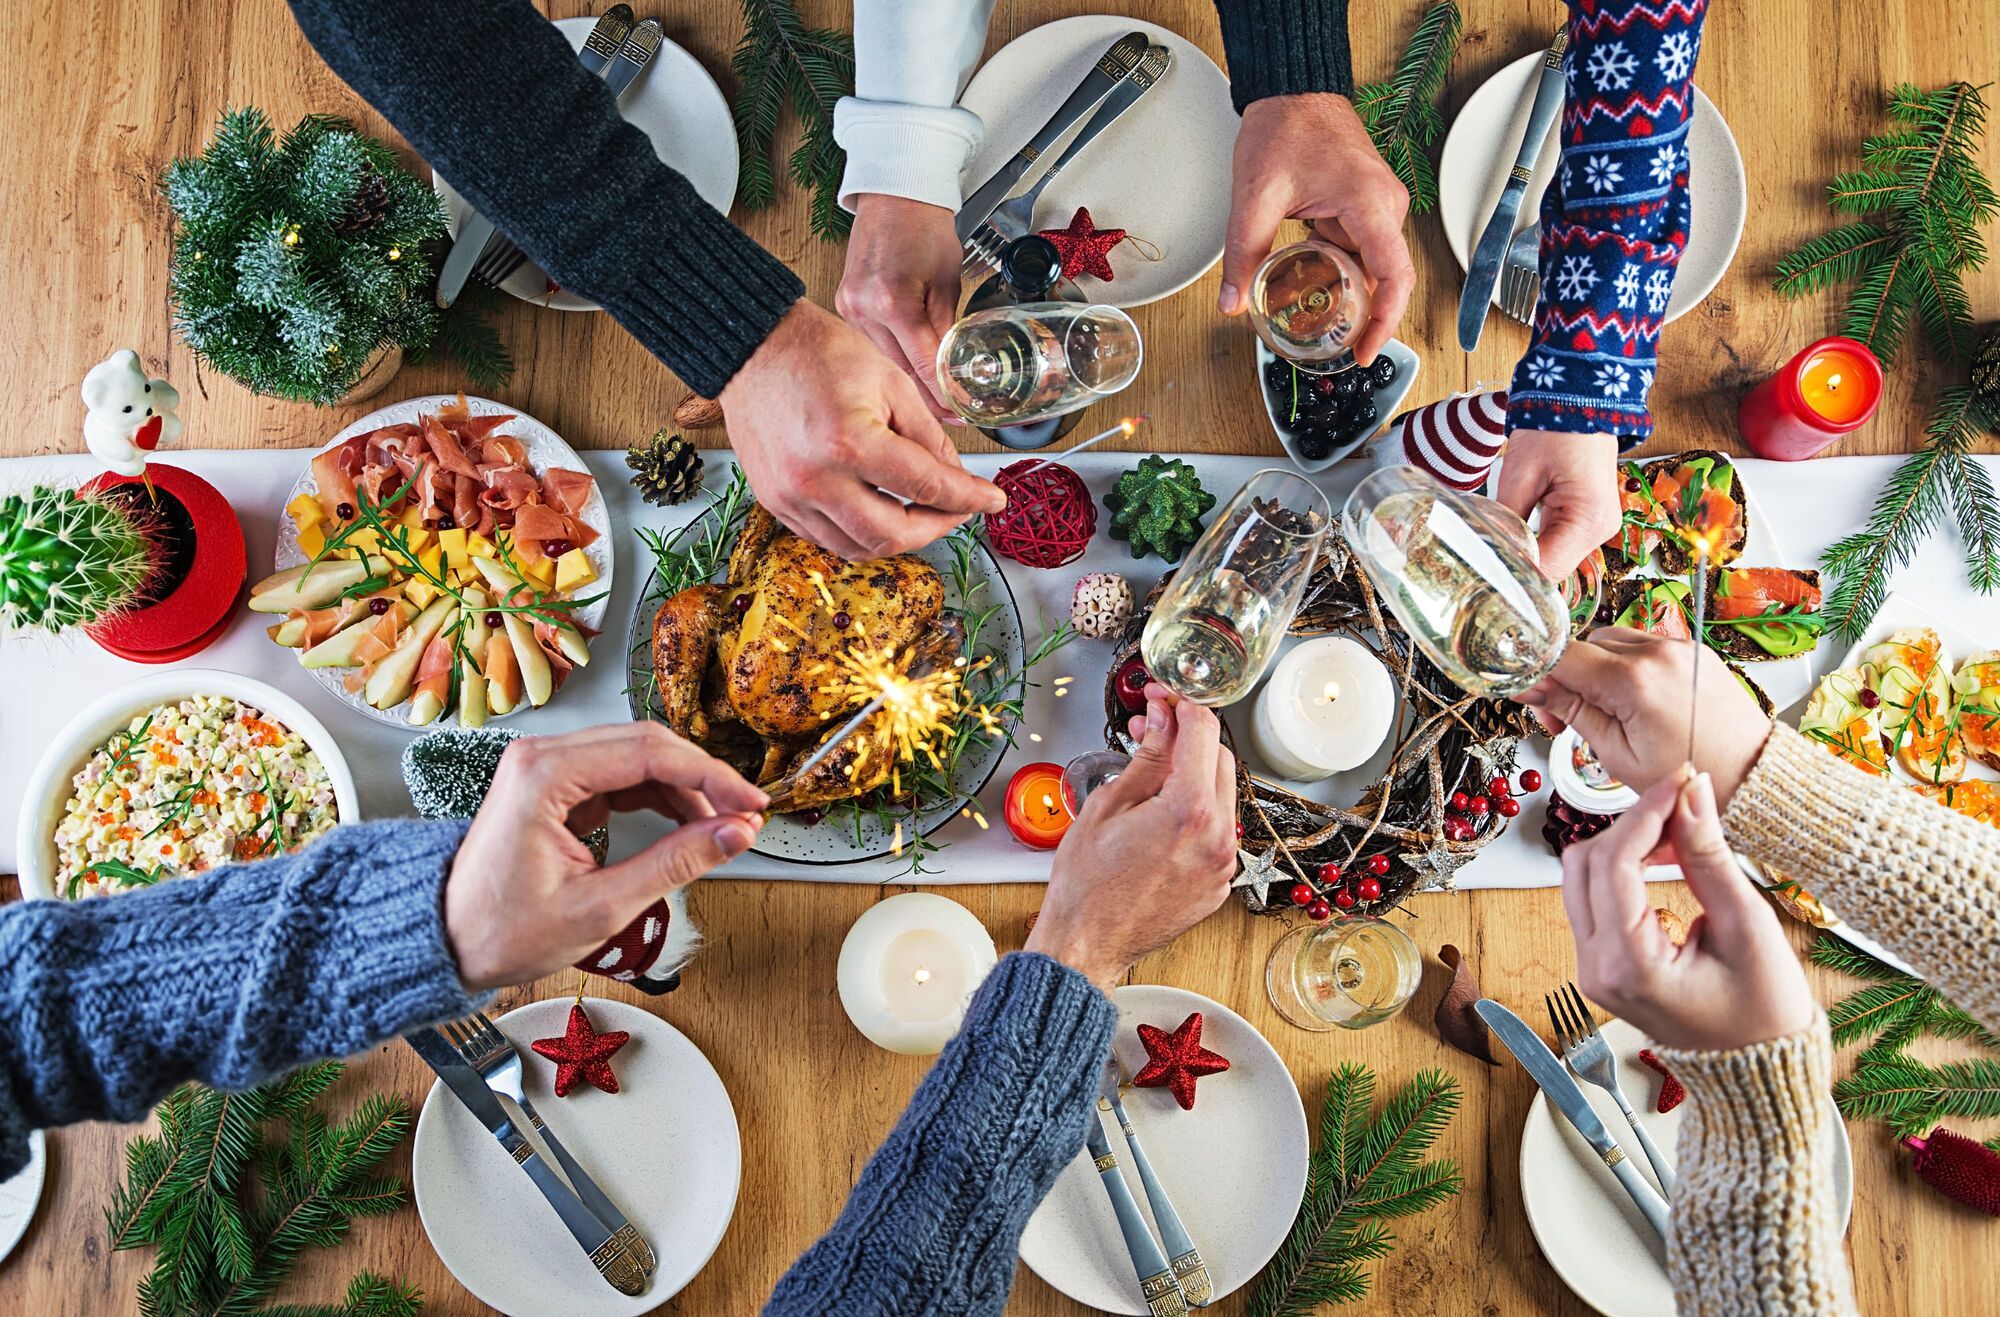 What to eat and how much to drink at Christmas to feel good: tips